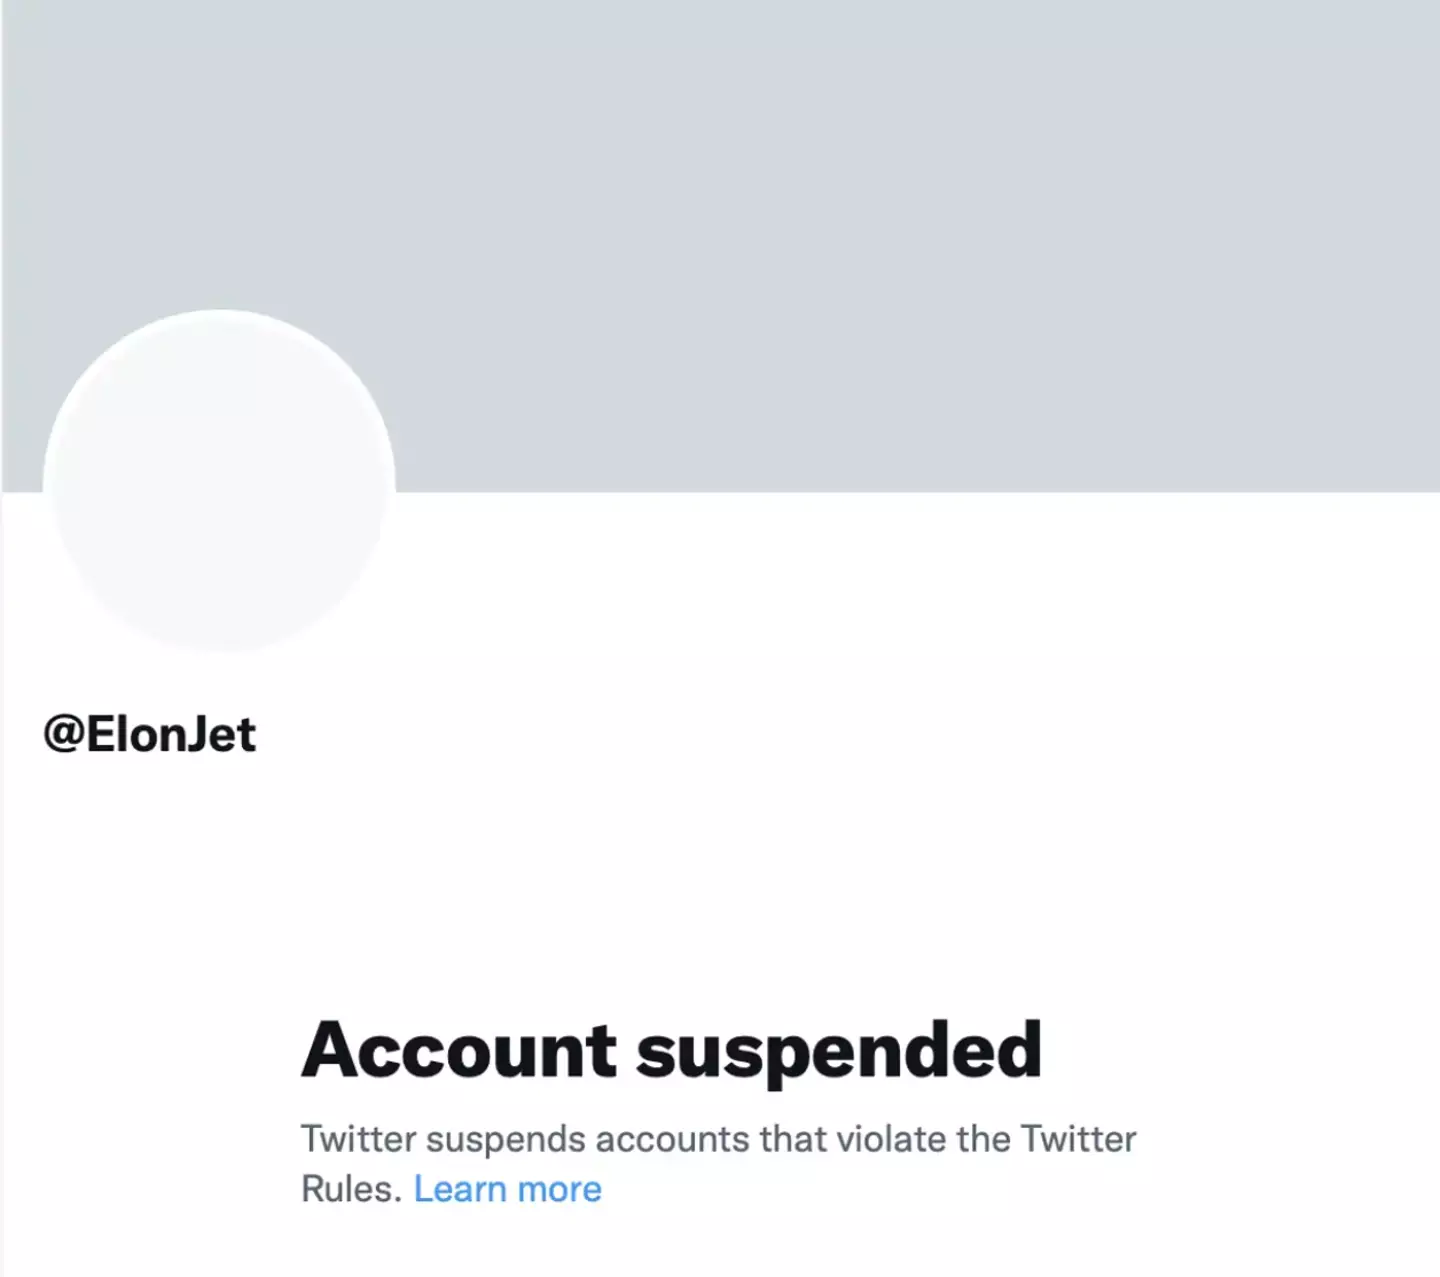 The ElonJet account has been banned.